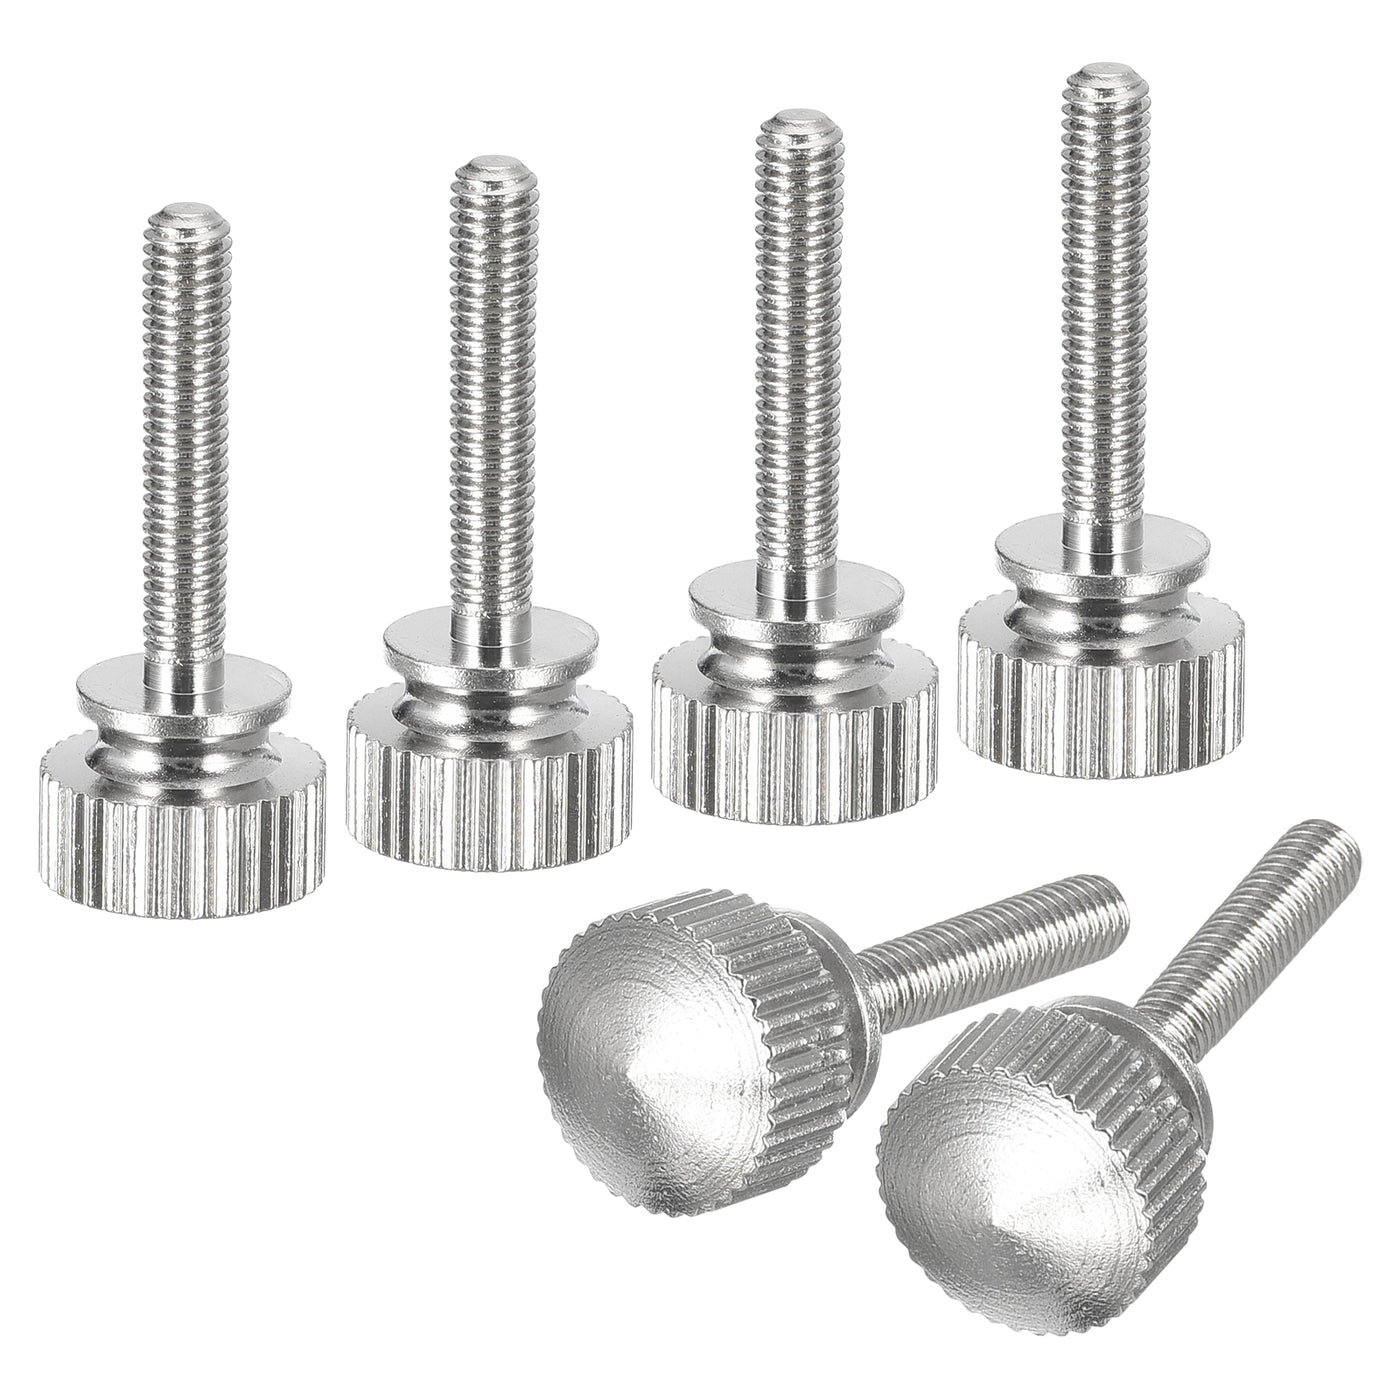 uxcell Uxcell M3x16mm Knurled Thumb Screws, 6pcs Brass Thumb Screws with Shoulder, Silver Tone